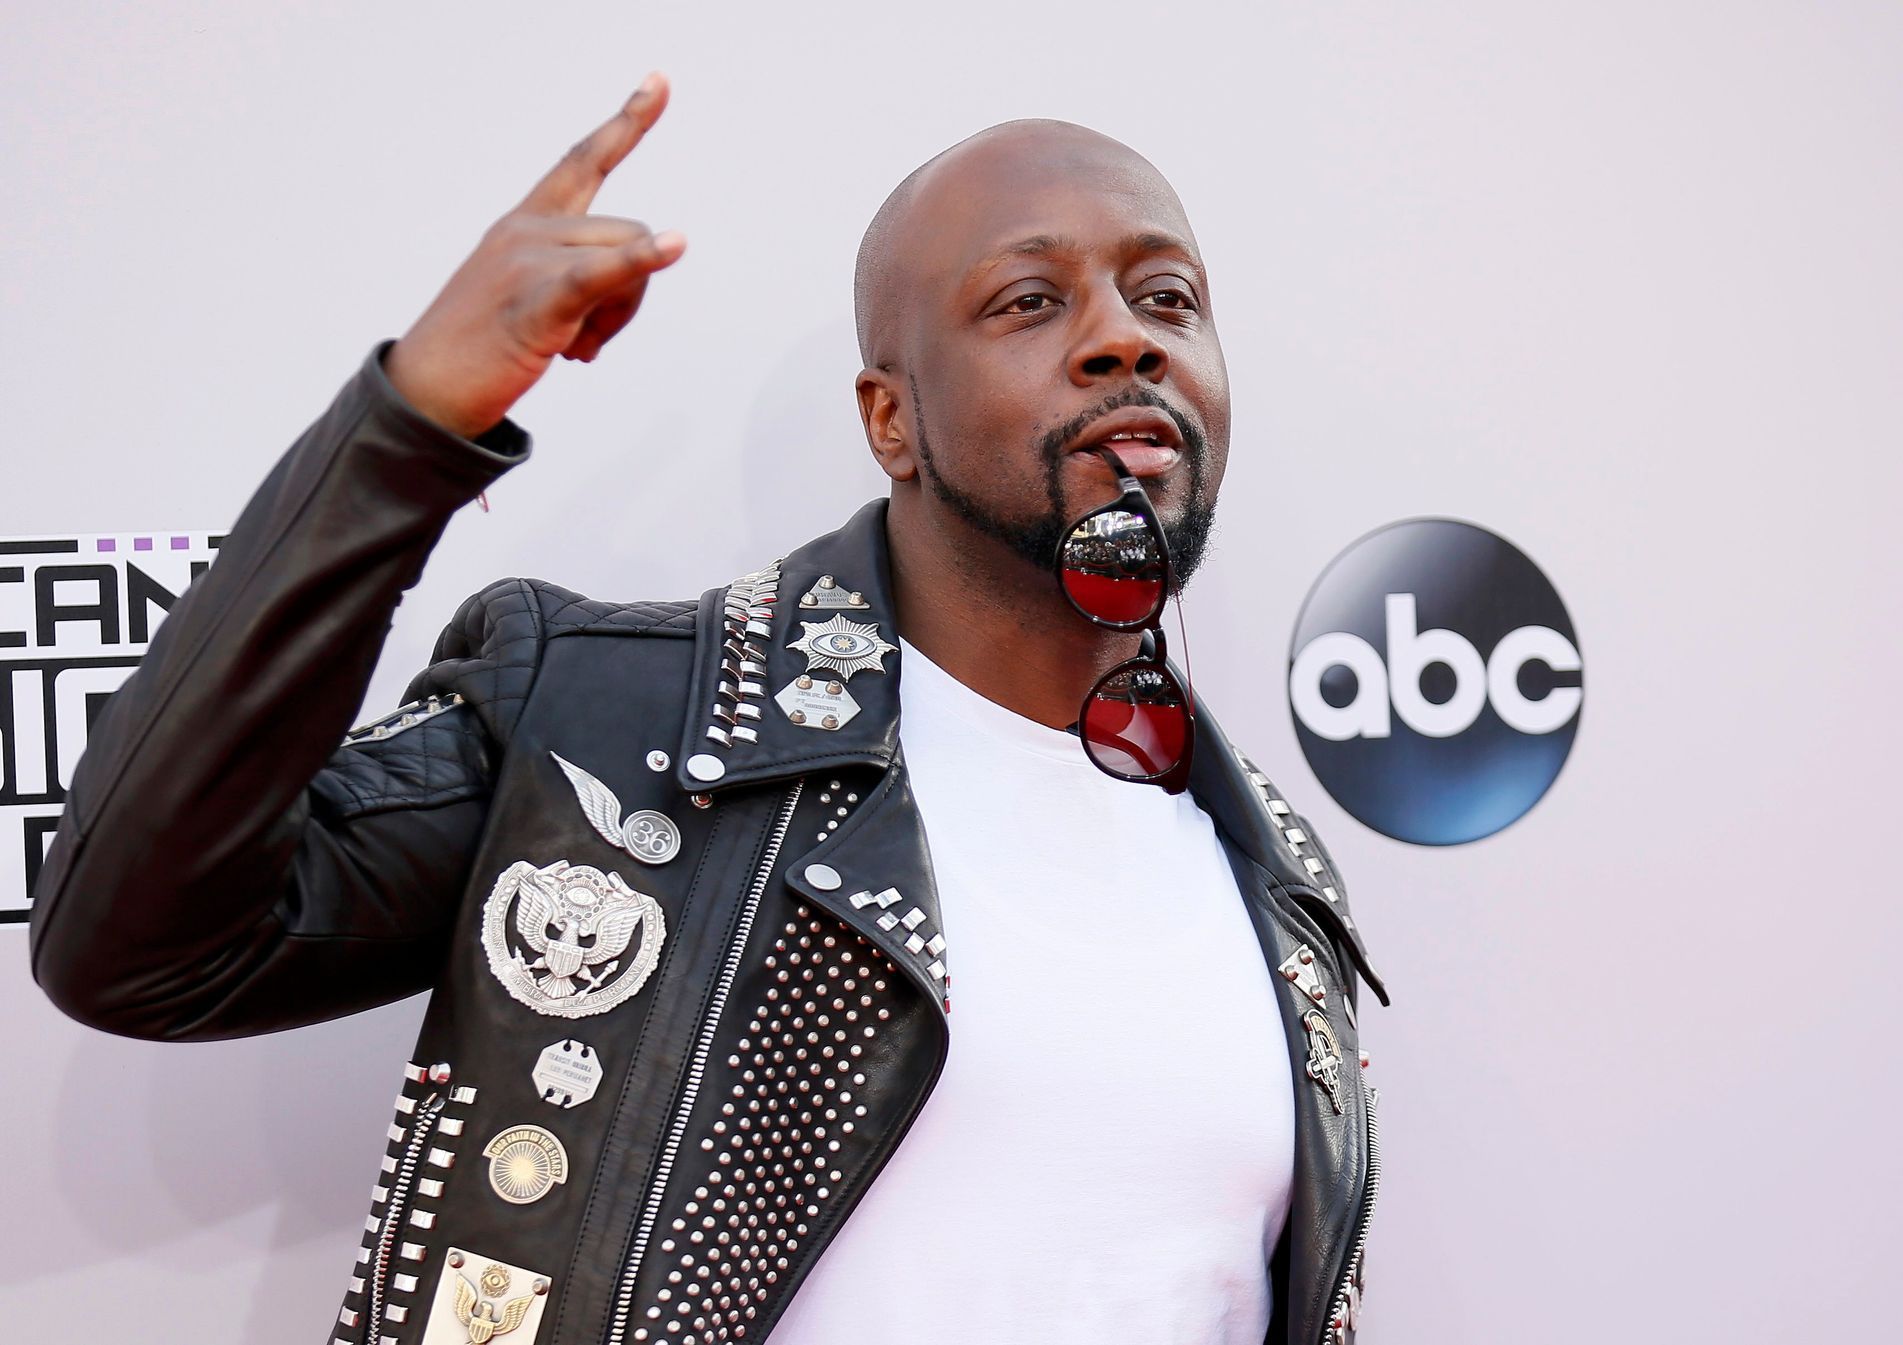 American Music Awards v Los Angeles - Wyclef Jean